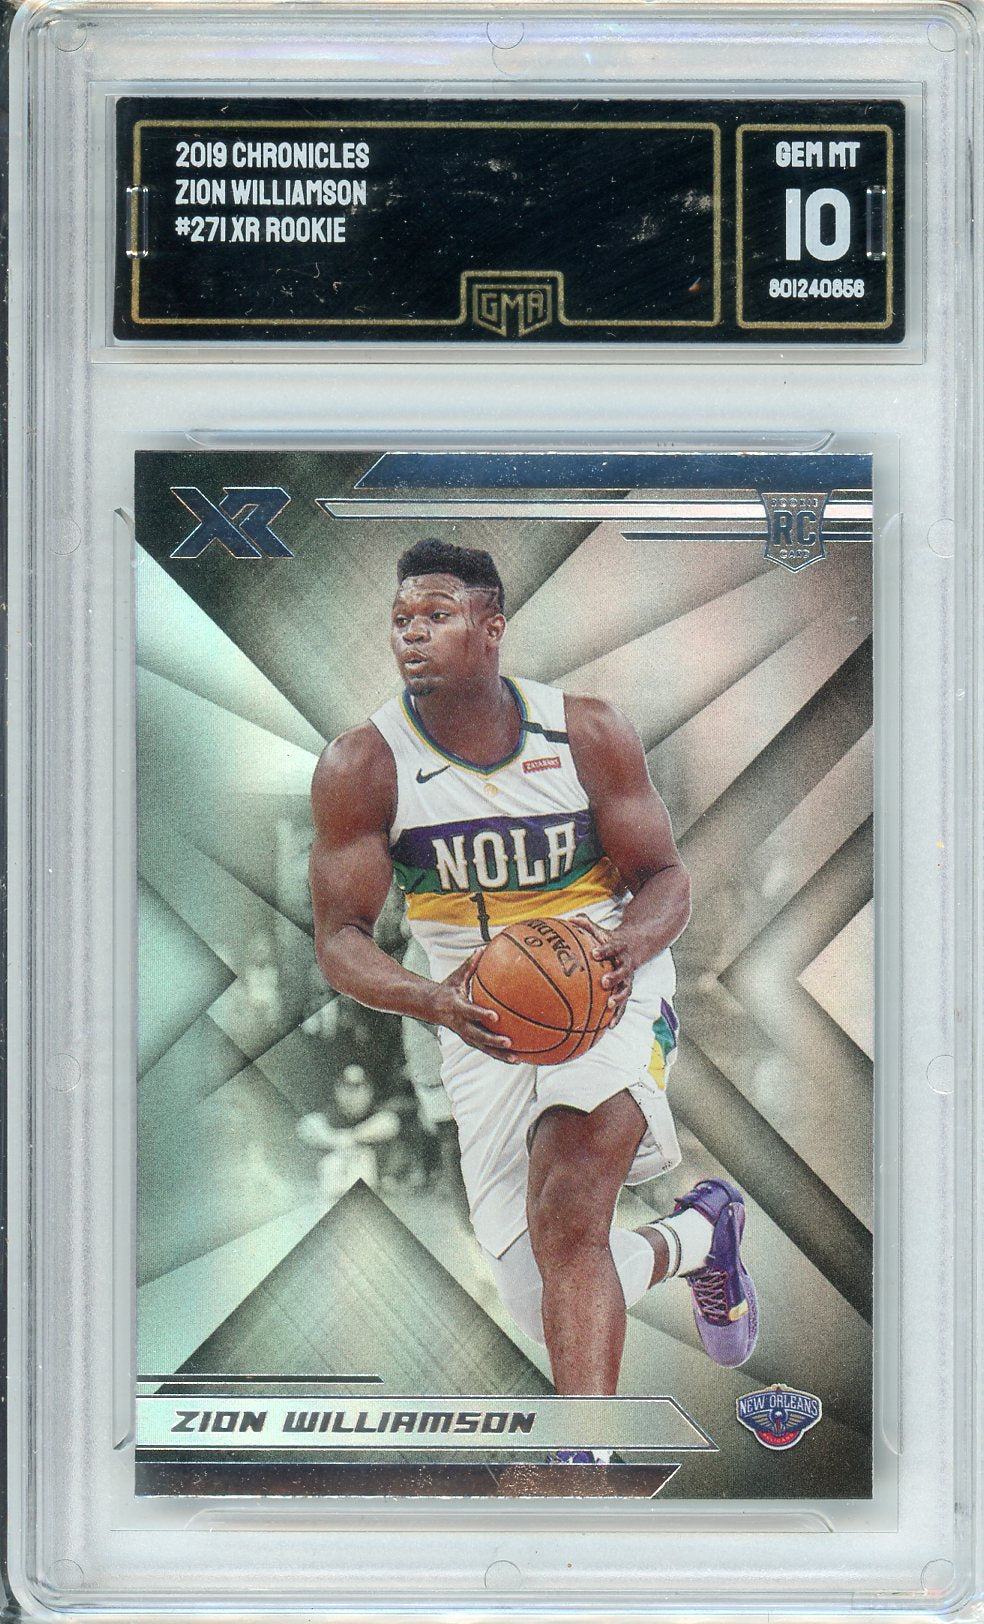 2019 Chronicles Zion Williamson #271 XR Rookie GMA 10